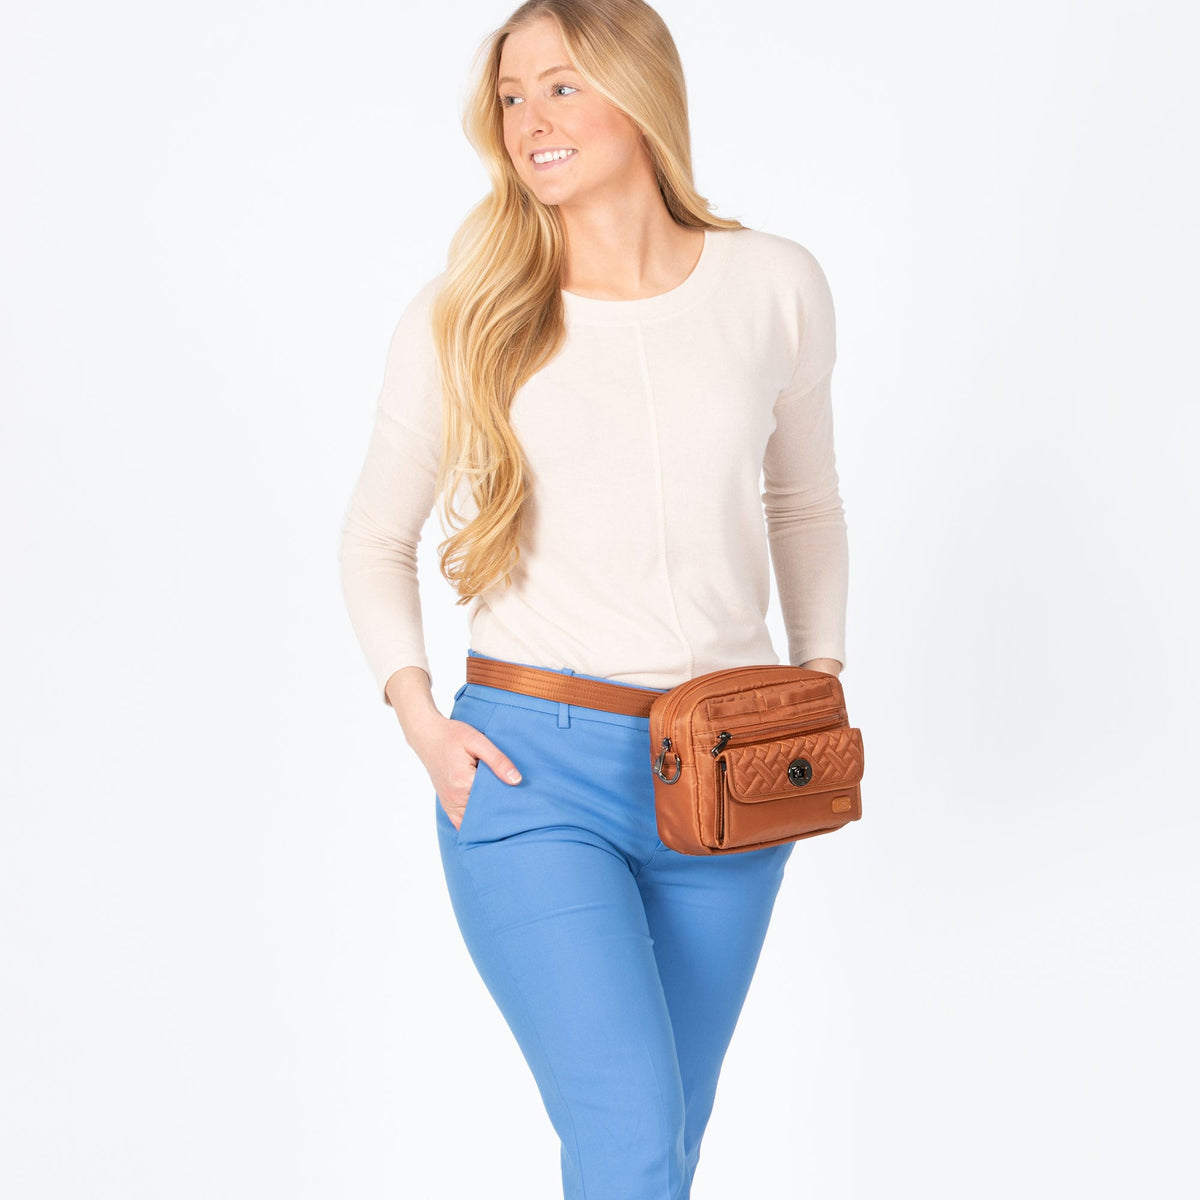 T j maxx online shopping what is a crossbody bag + FREE SHIPPING